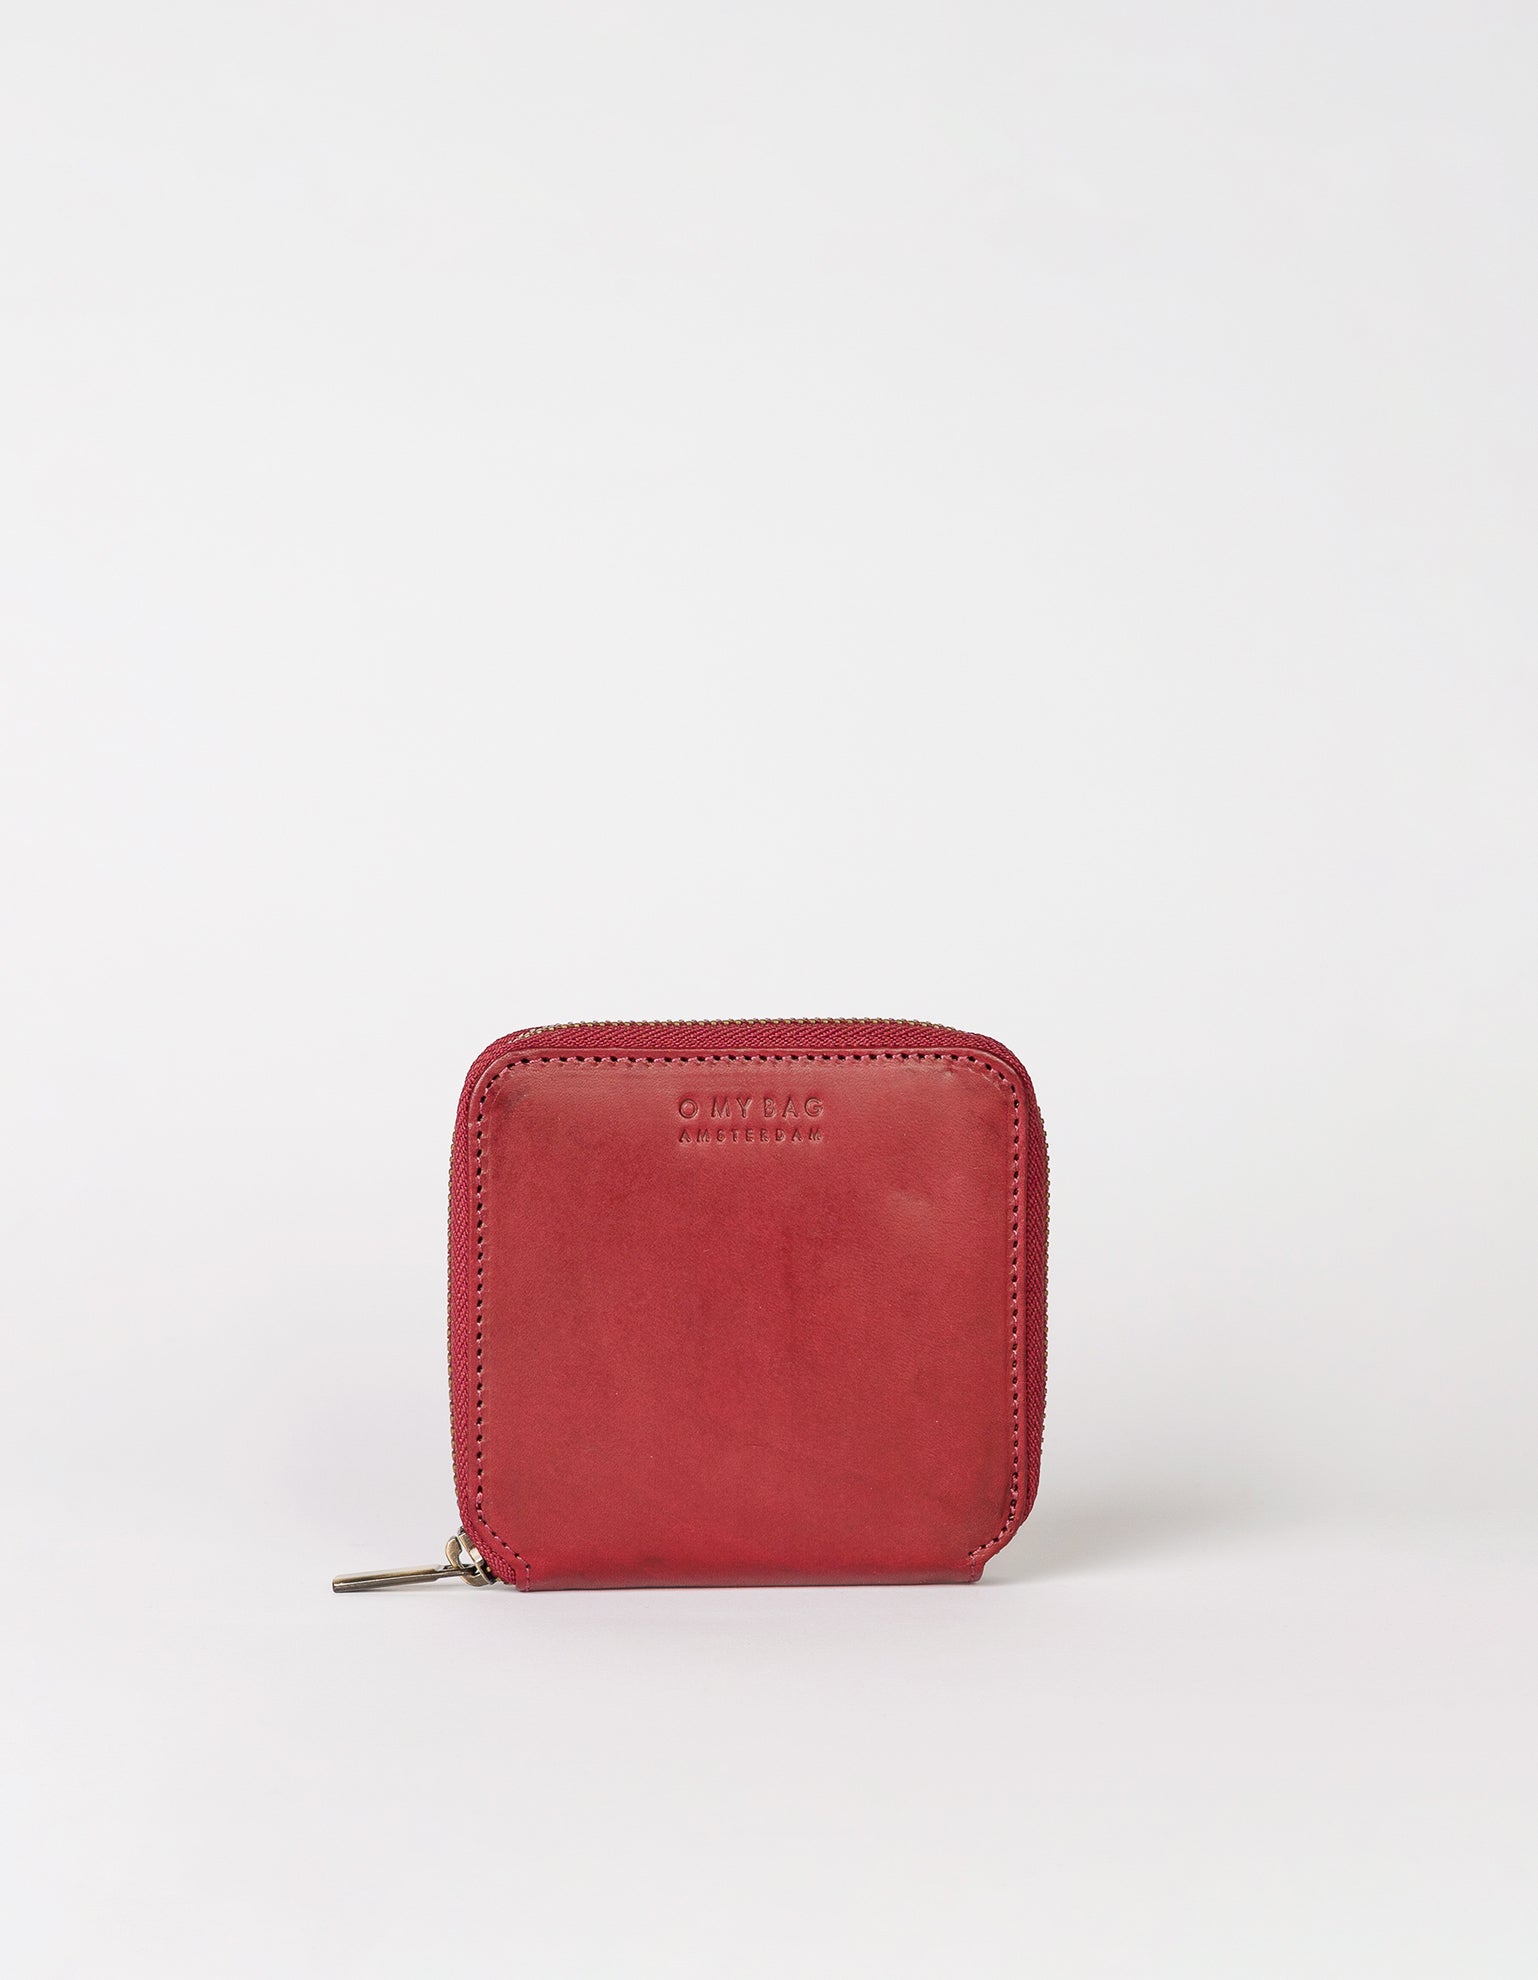 Sonny Square Wallet Ruby Classic Leather. Front product image